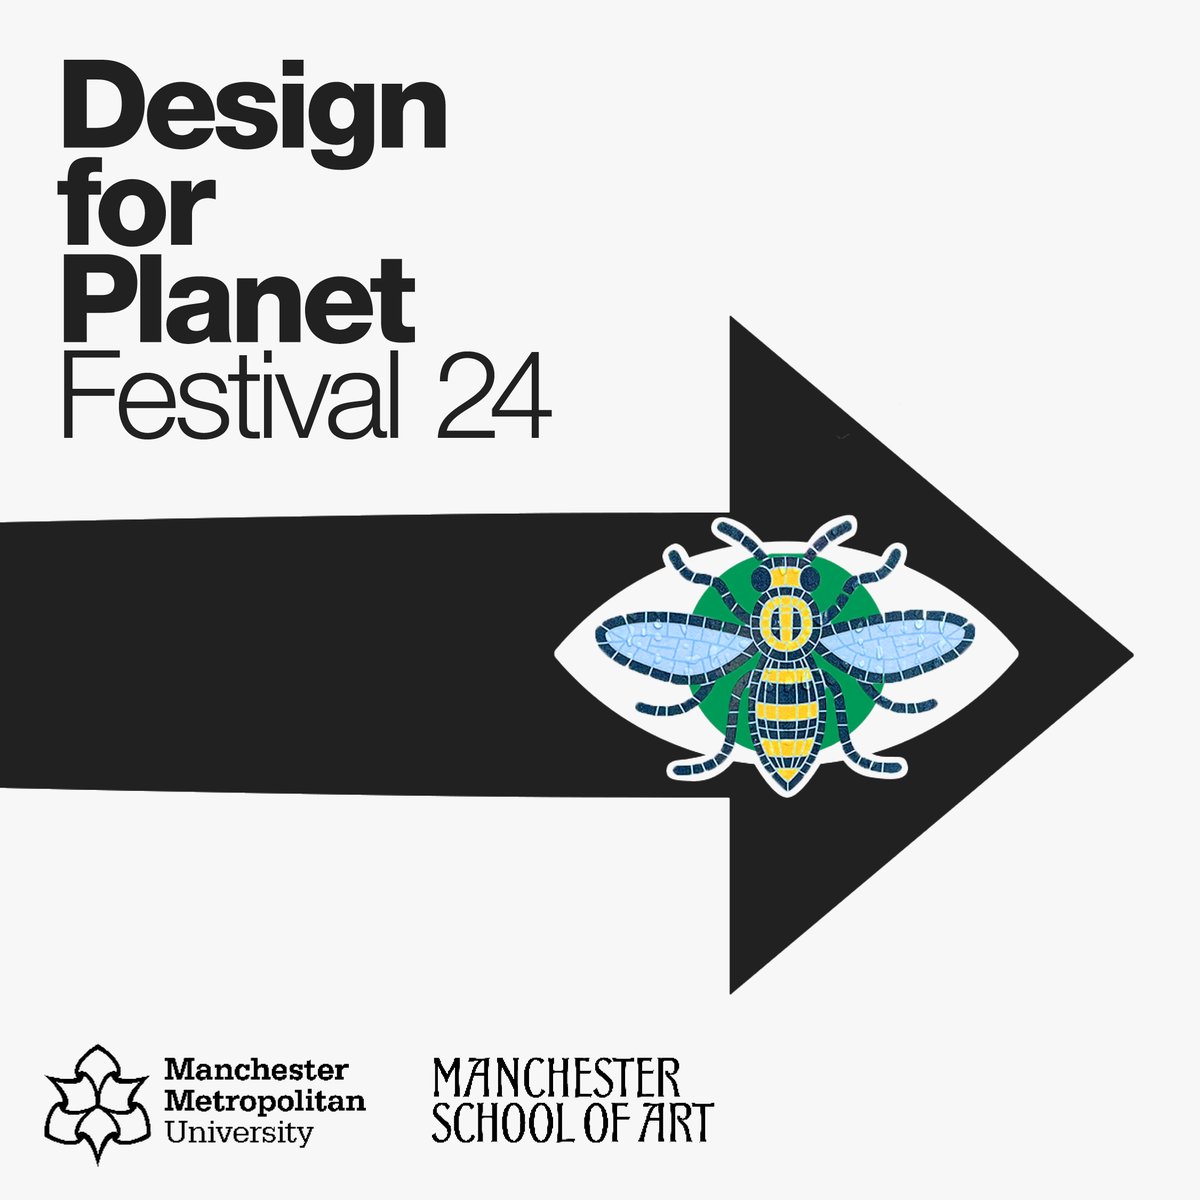 #DesignForPlanet Festival is back! This year, we're a @McrSchArt, @ManMetUni. This year's theme is Positive Business! 📣 If you know any fantastic local sustainable businesses in #Manchester, contact us at: press@designcouncil.org.uk.